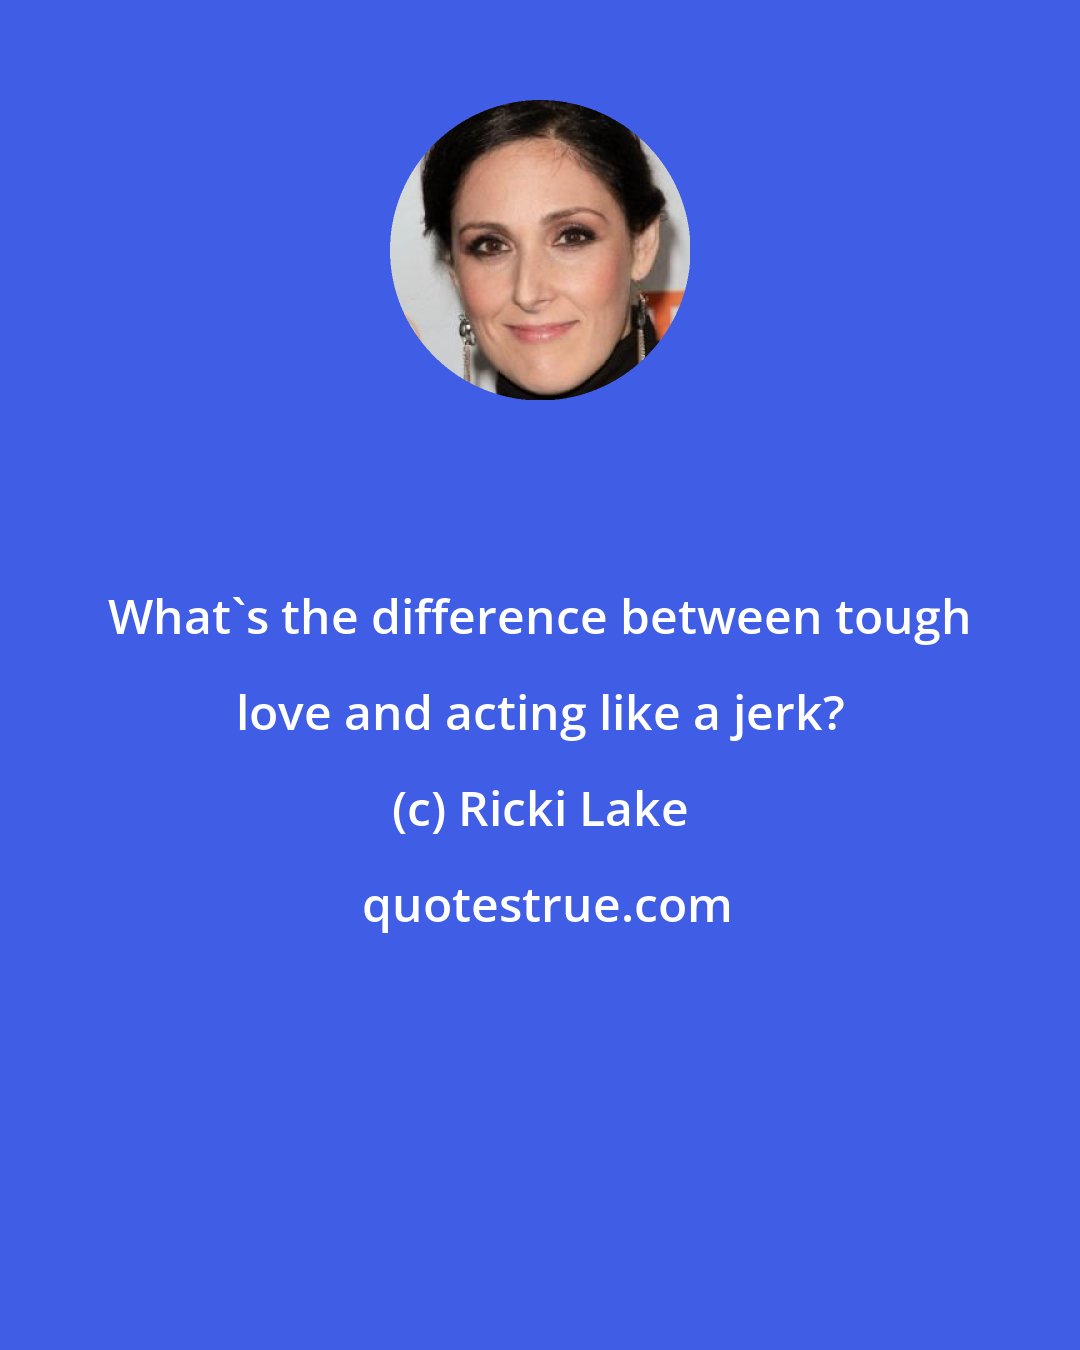 Ricki Lake: What's the difference between tough love and acting like a jerk?